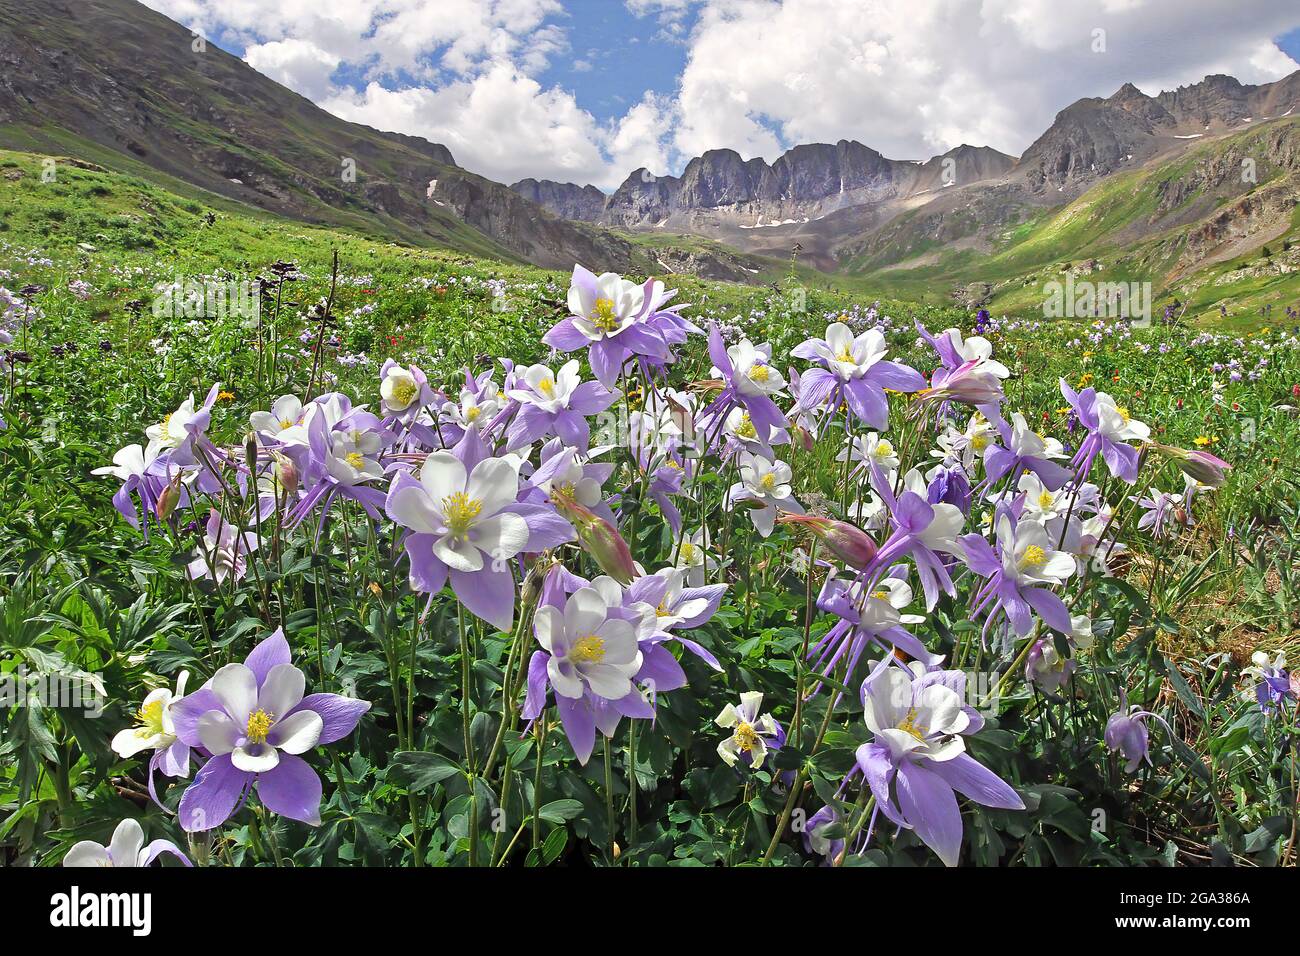 Wild columbine flowers (Aquilegia coerulea) in purple and white blooming in a meadow in a valley surrounded  by rugged San Juan Mountains in the Am... Stock Photo